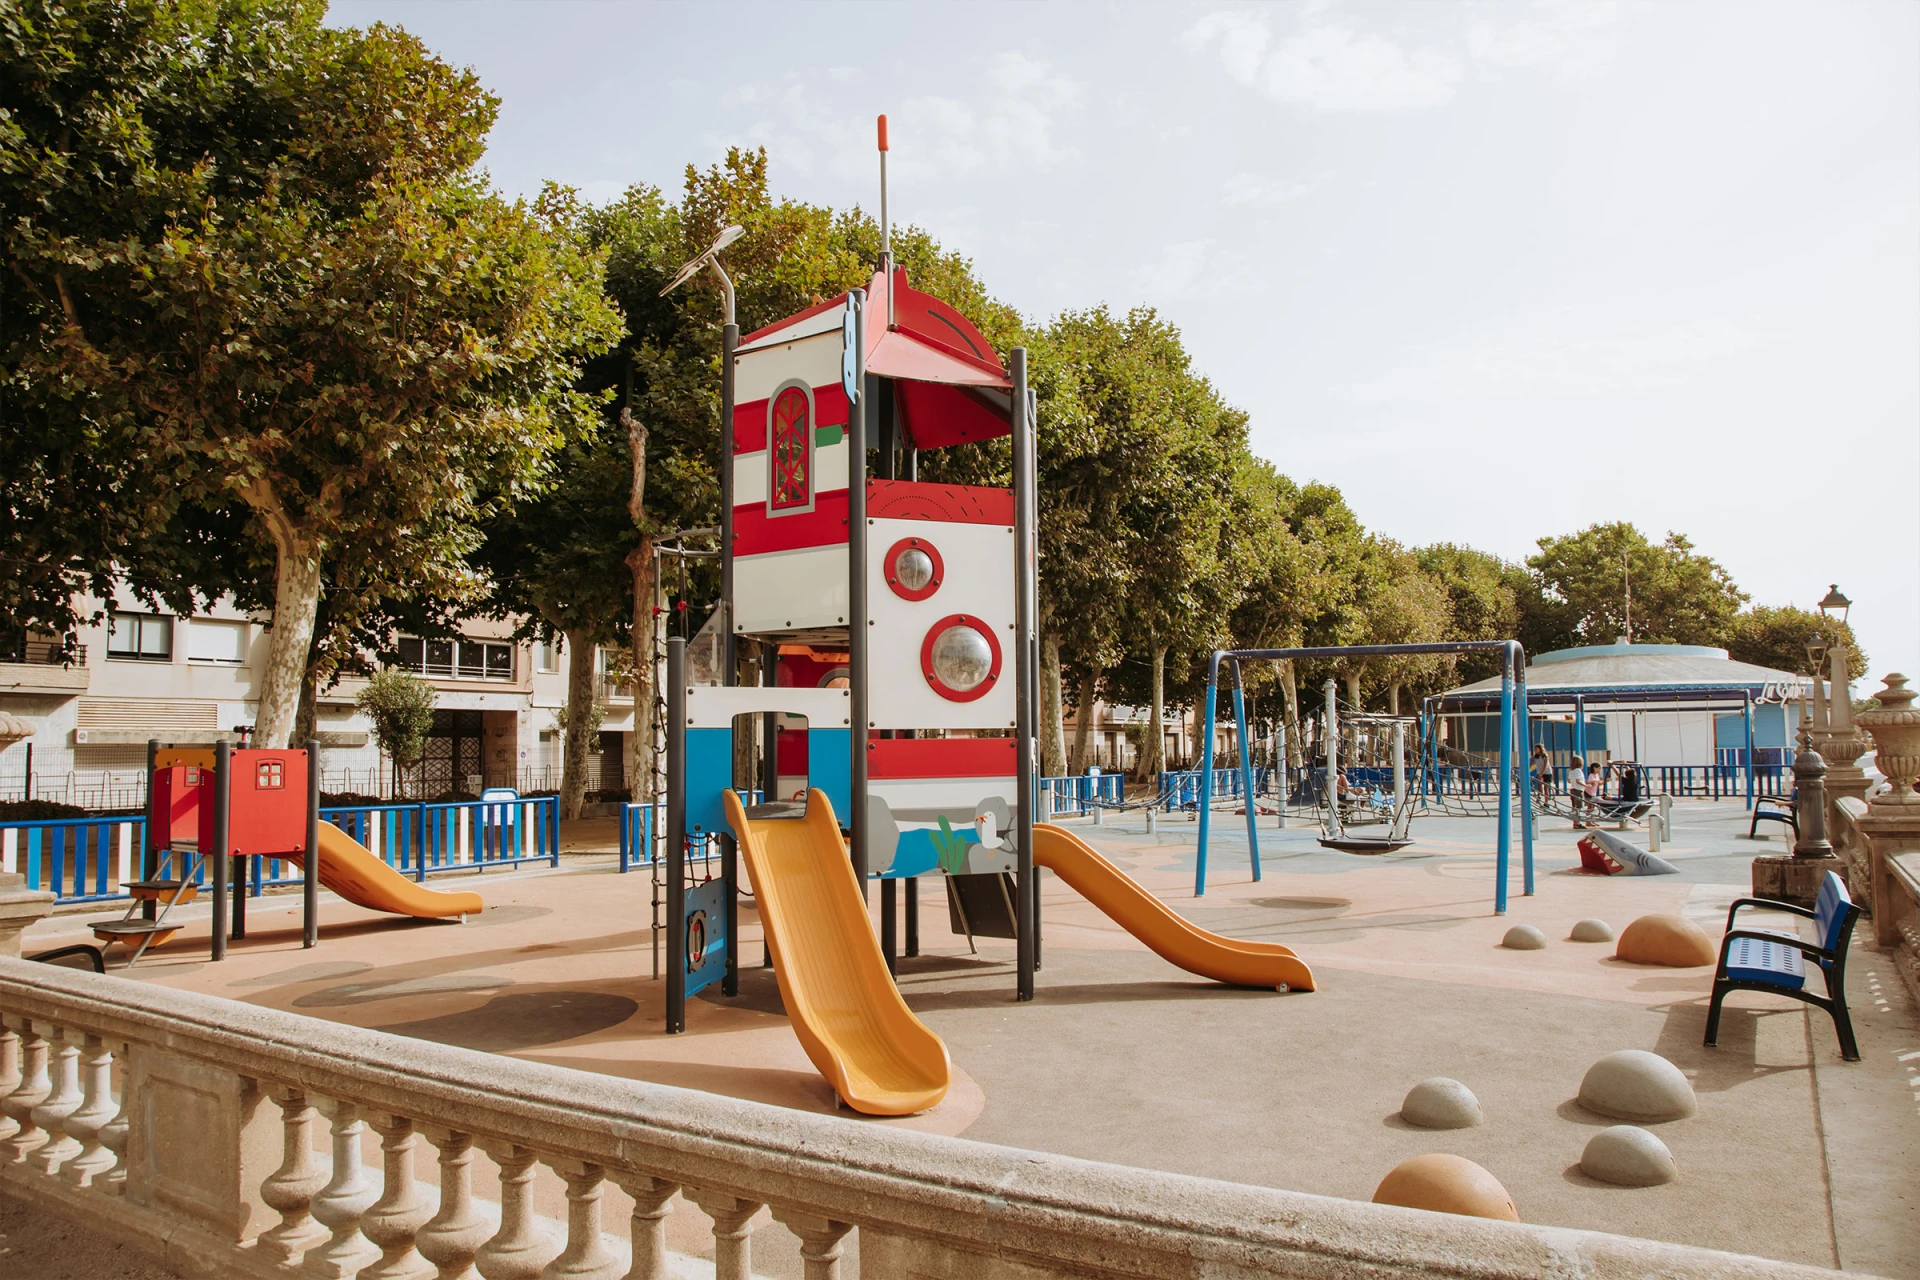 A playground with a slide and a tower.